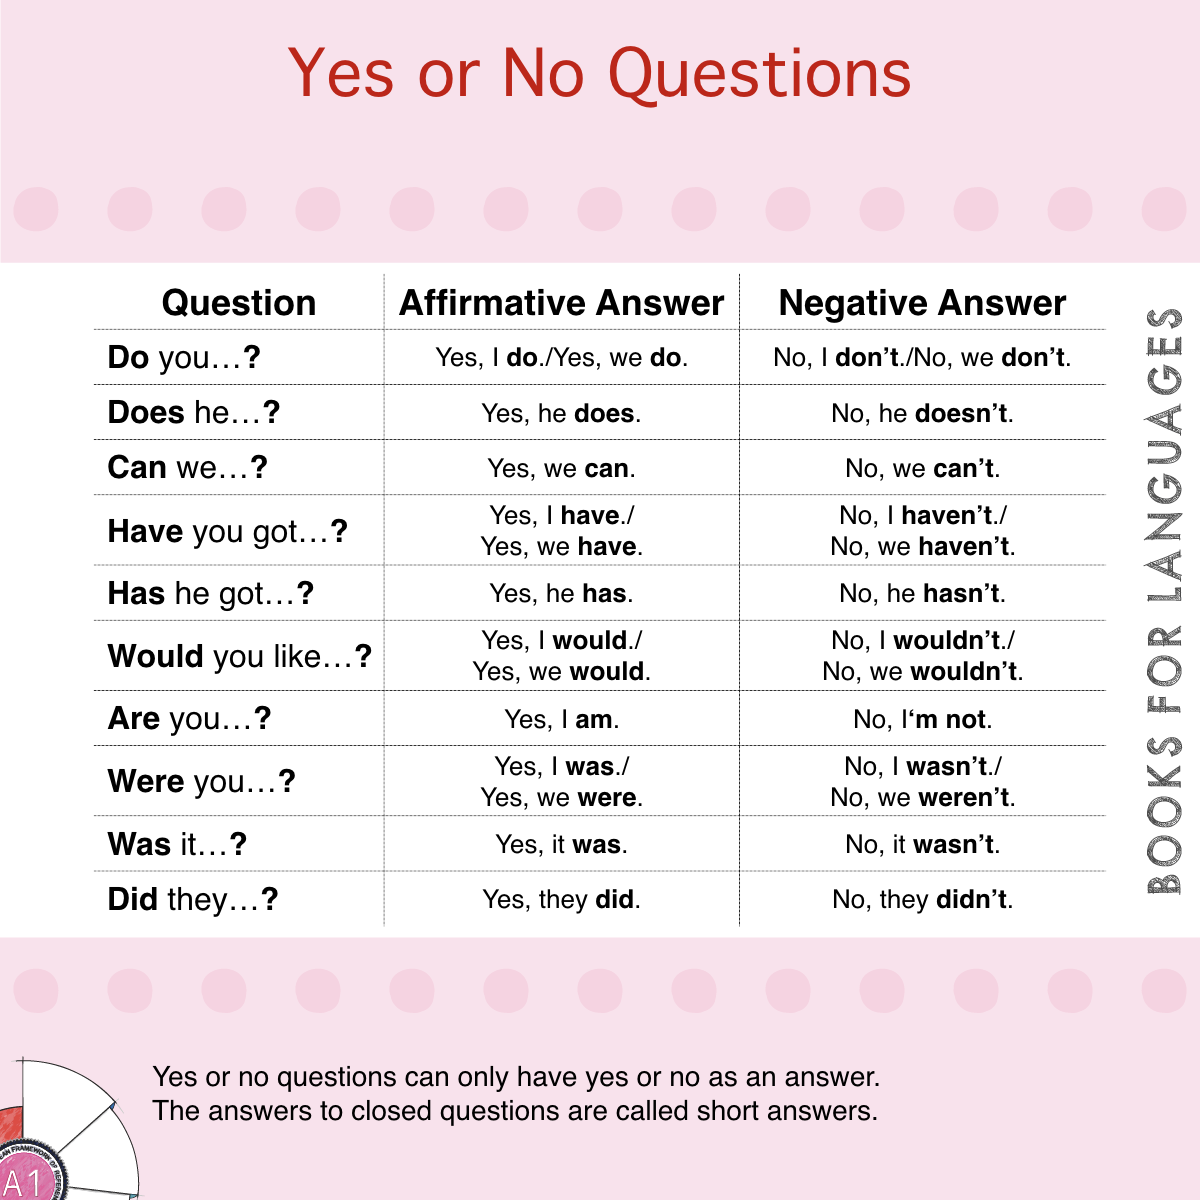 Yes Or No Questions In Present Form English Grammar A1 Level.